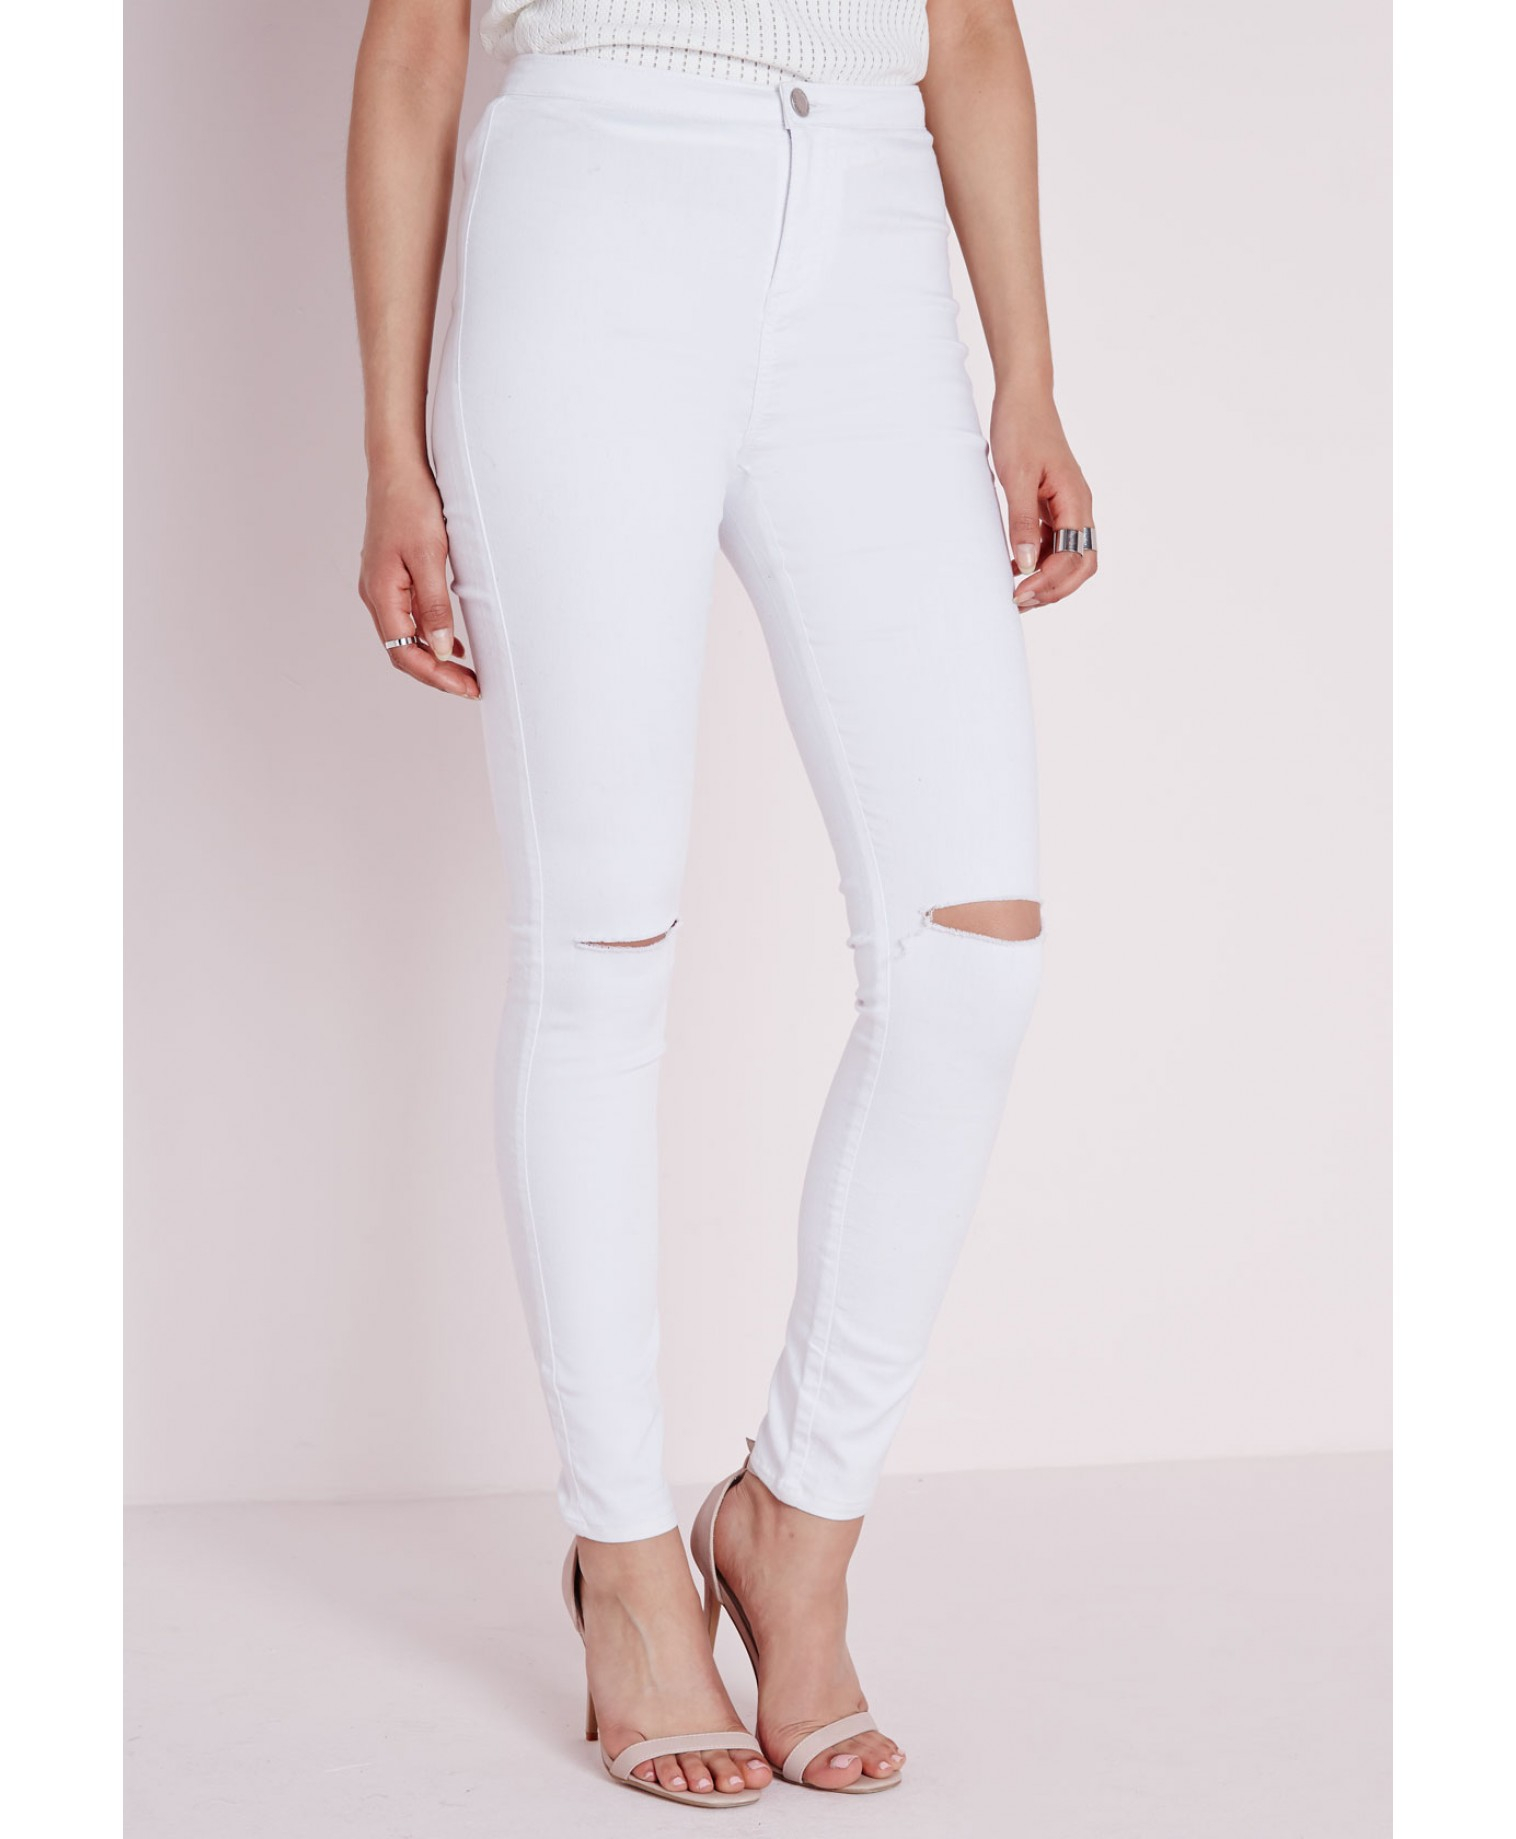 white jeans with holes in knees